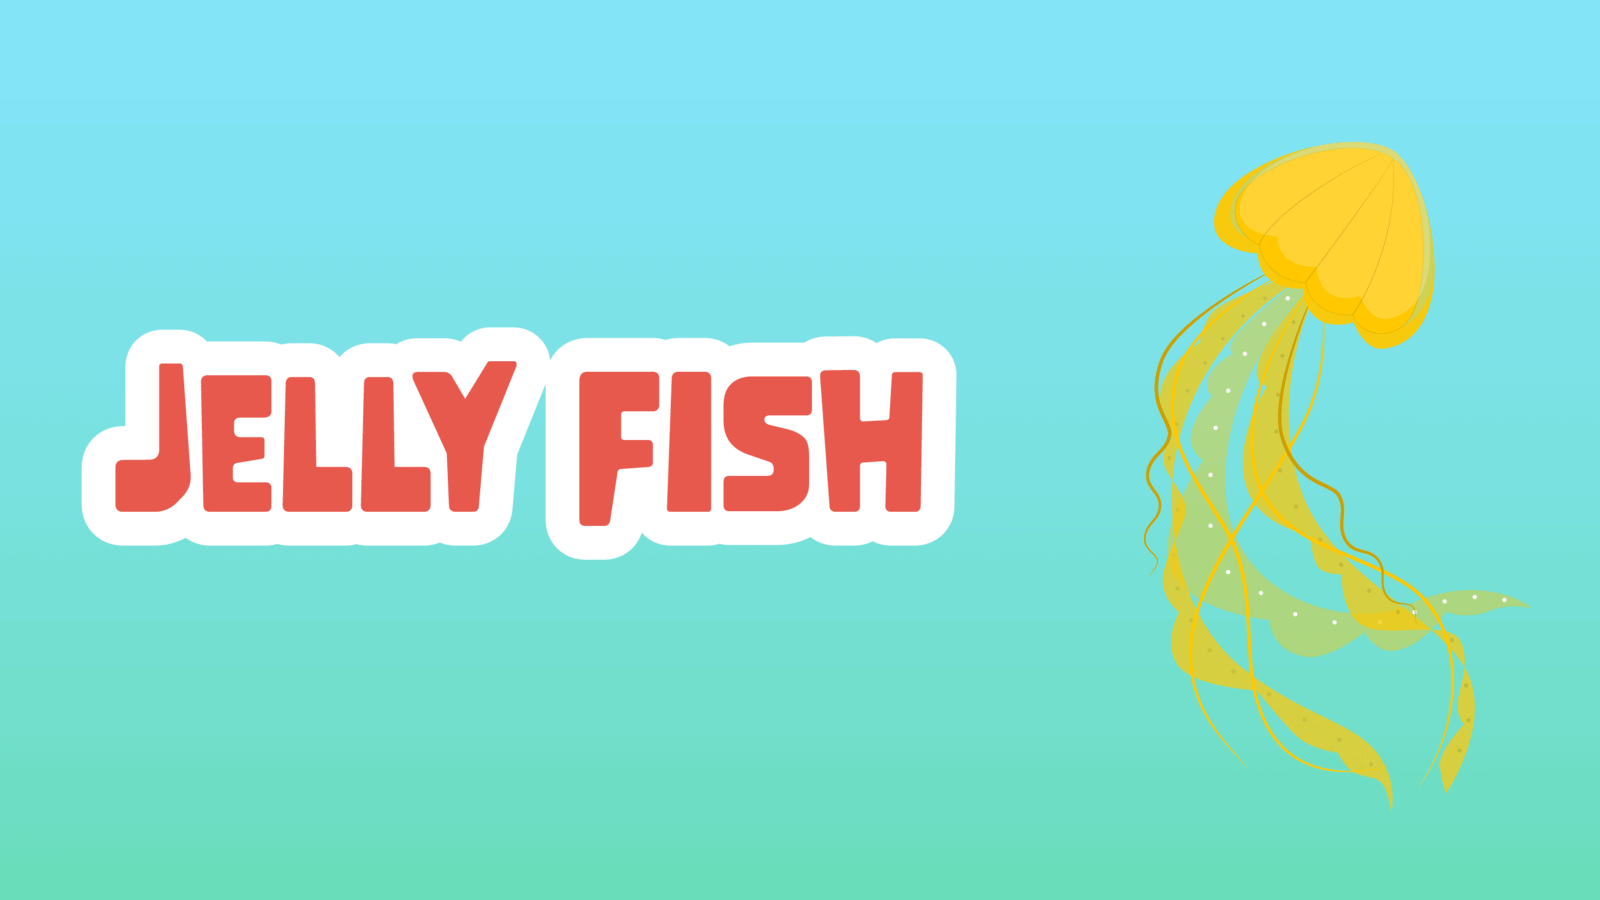 Jellyfish Facts for Kids – 5 Interesting Facts about Jellyfish